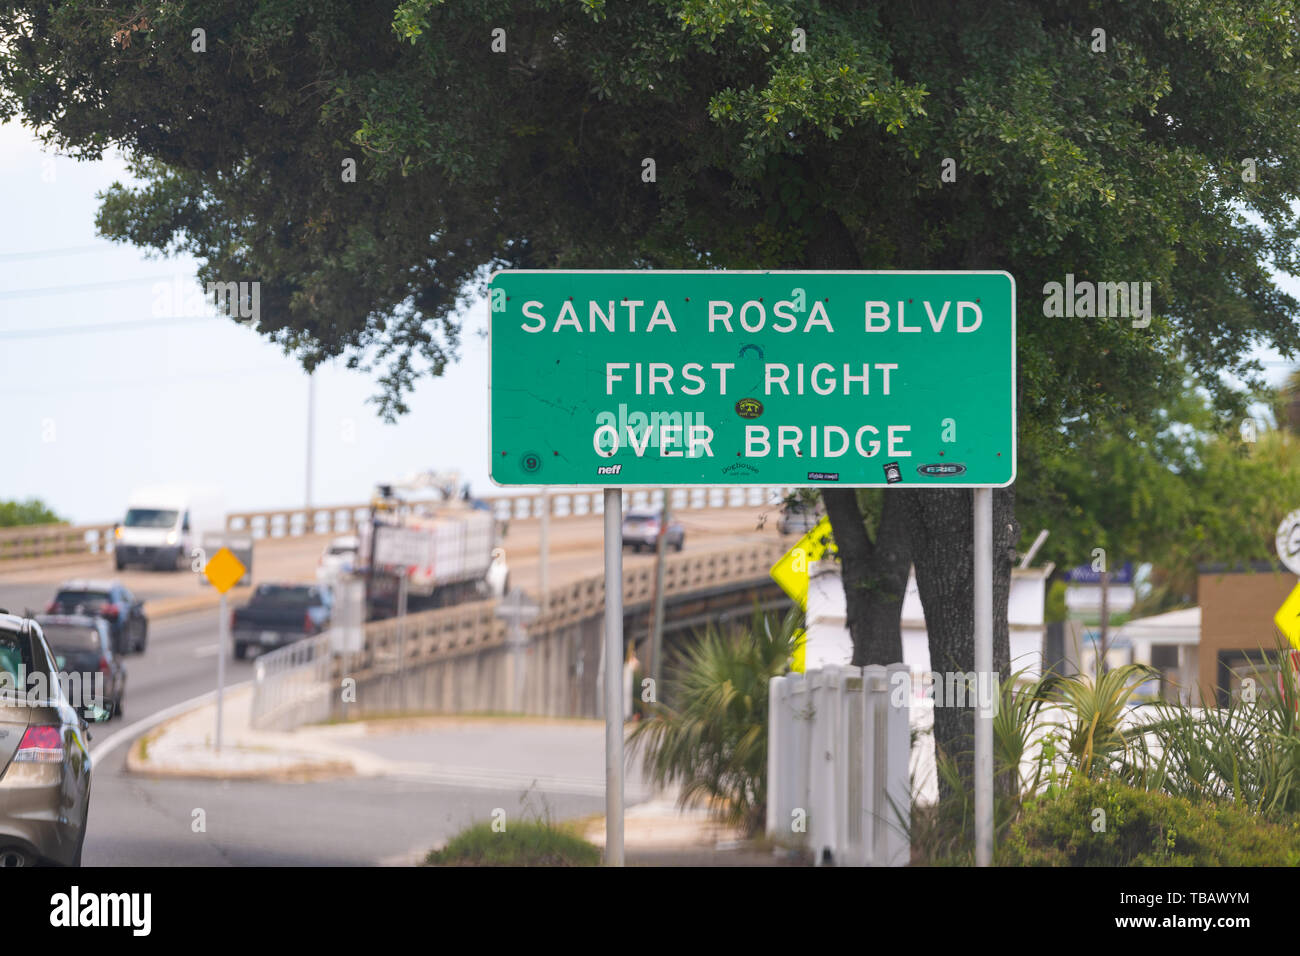 Fort Walton Beach, USA - April 24, 2018: Green road sign for Santa Rosa Blvd boulevard street in Florida Panhandle city, town in Gulf of Mexico at Eme Stock Photo